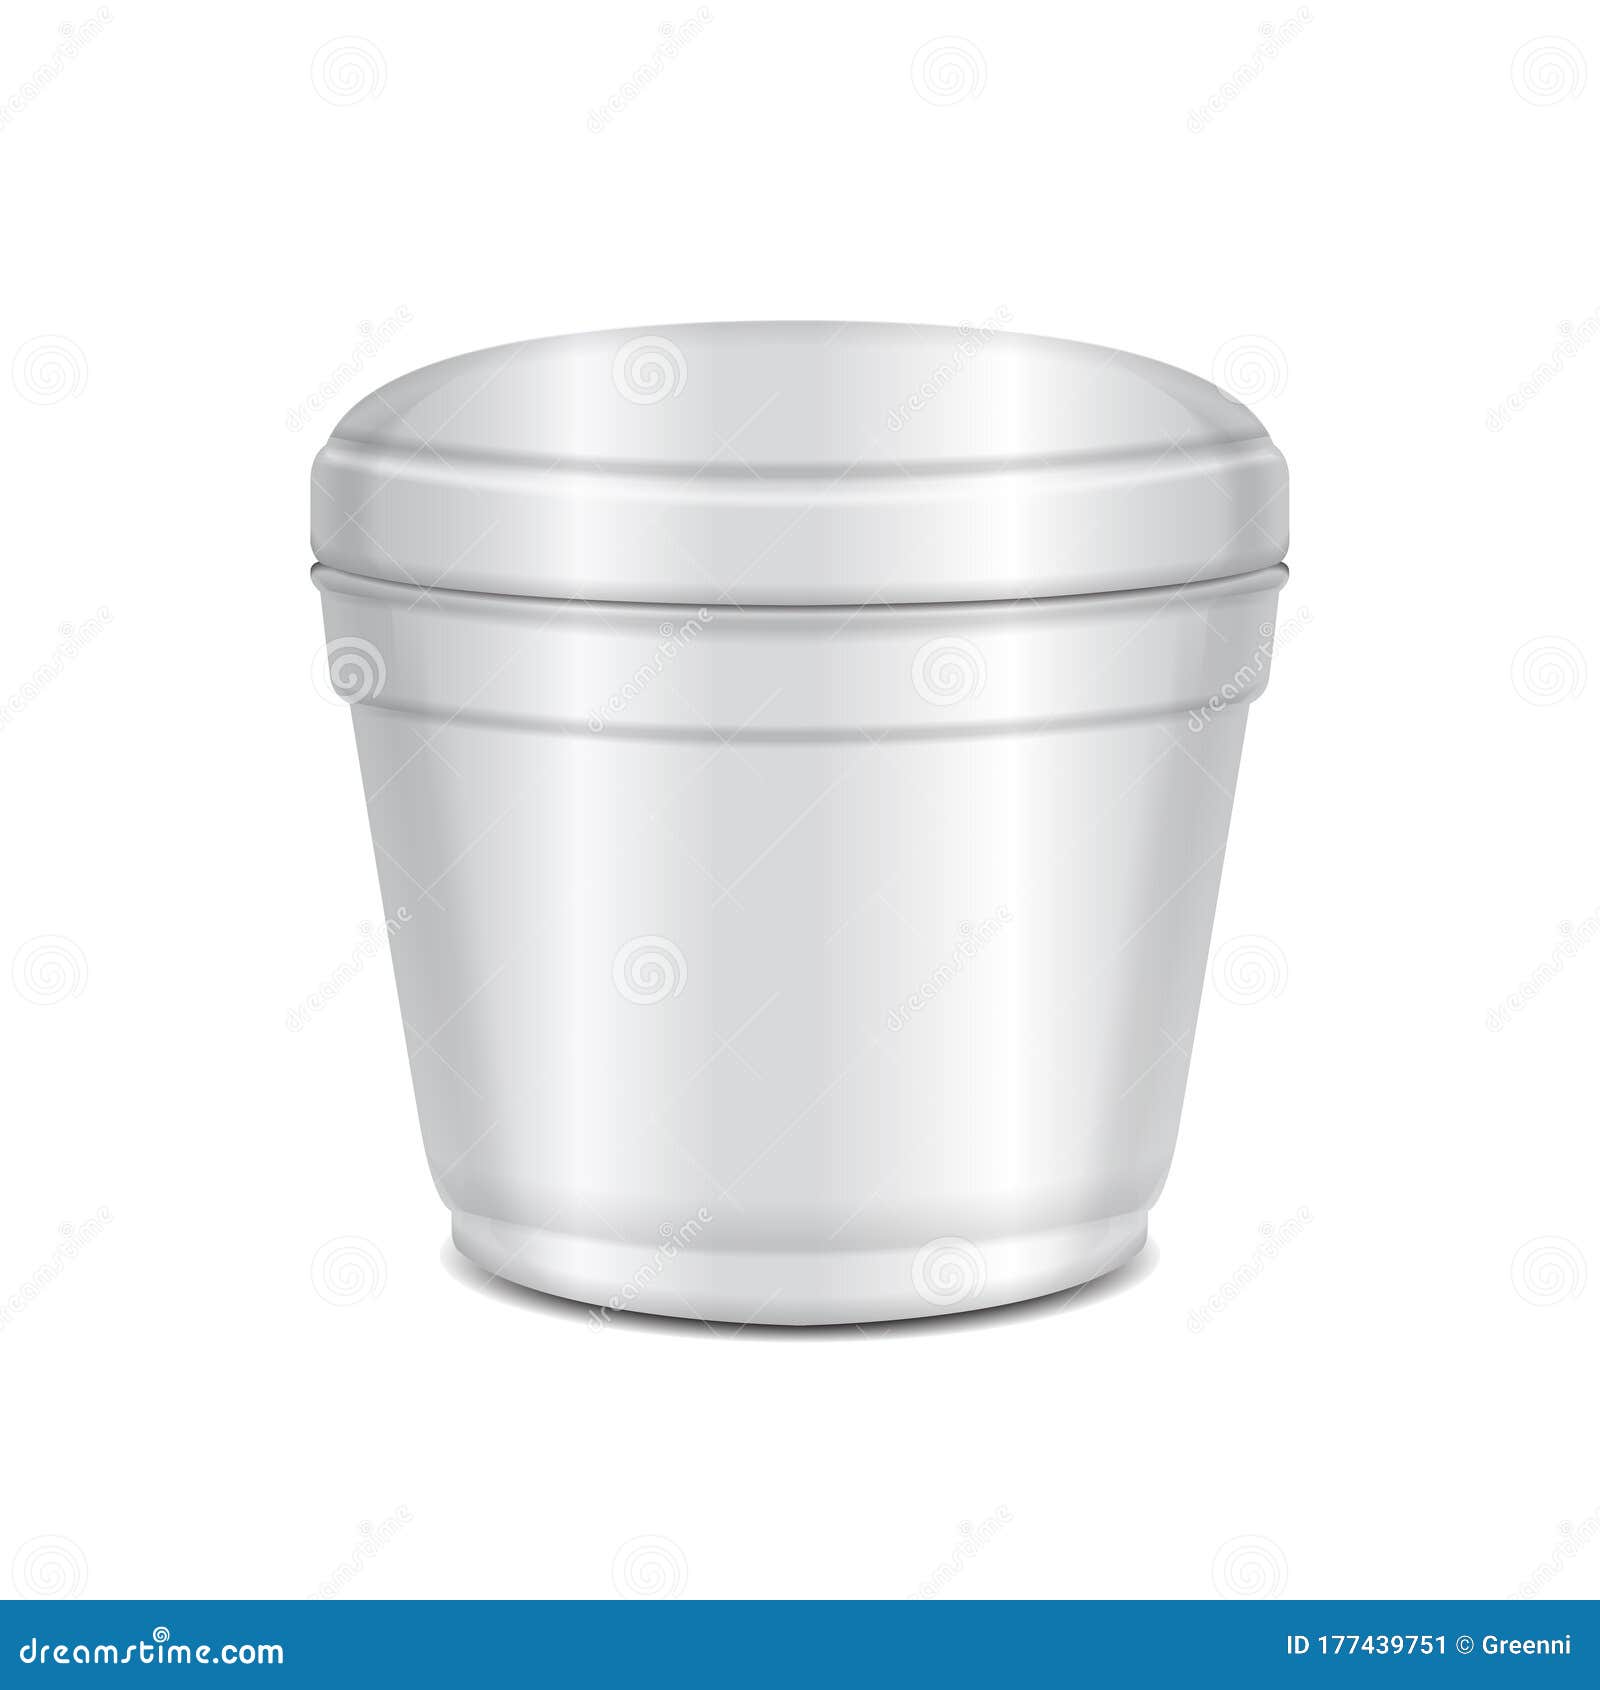 Download Packaging Soup Bowl Stock Illustrations 181 Packaging Soup Bowl Stock Illustrations Vectors Clipart Dreamstime